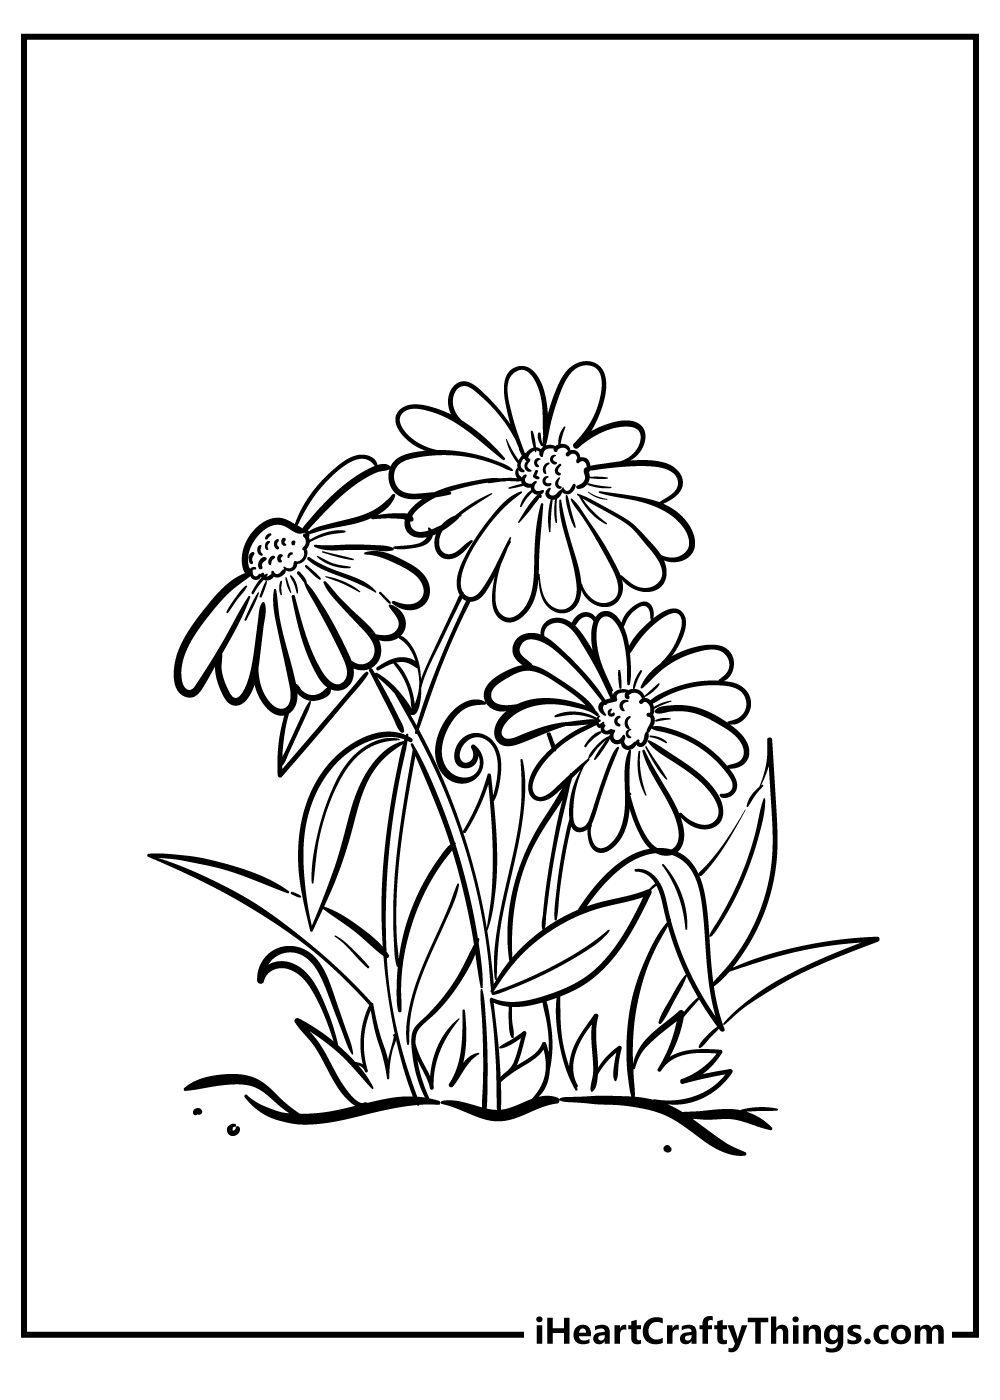 Daisy Coloring Pages for preschoolers free printable